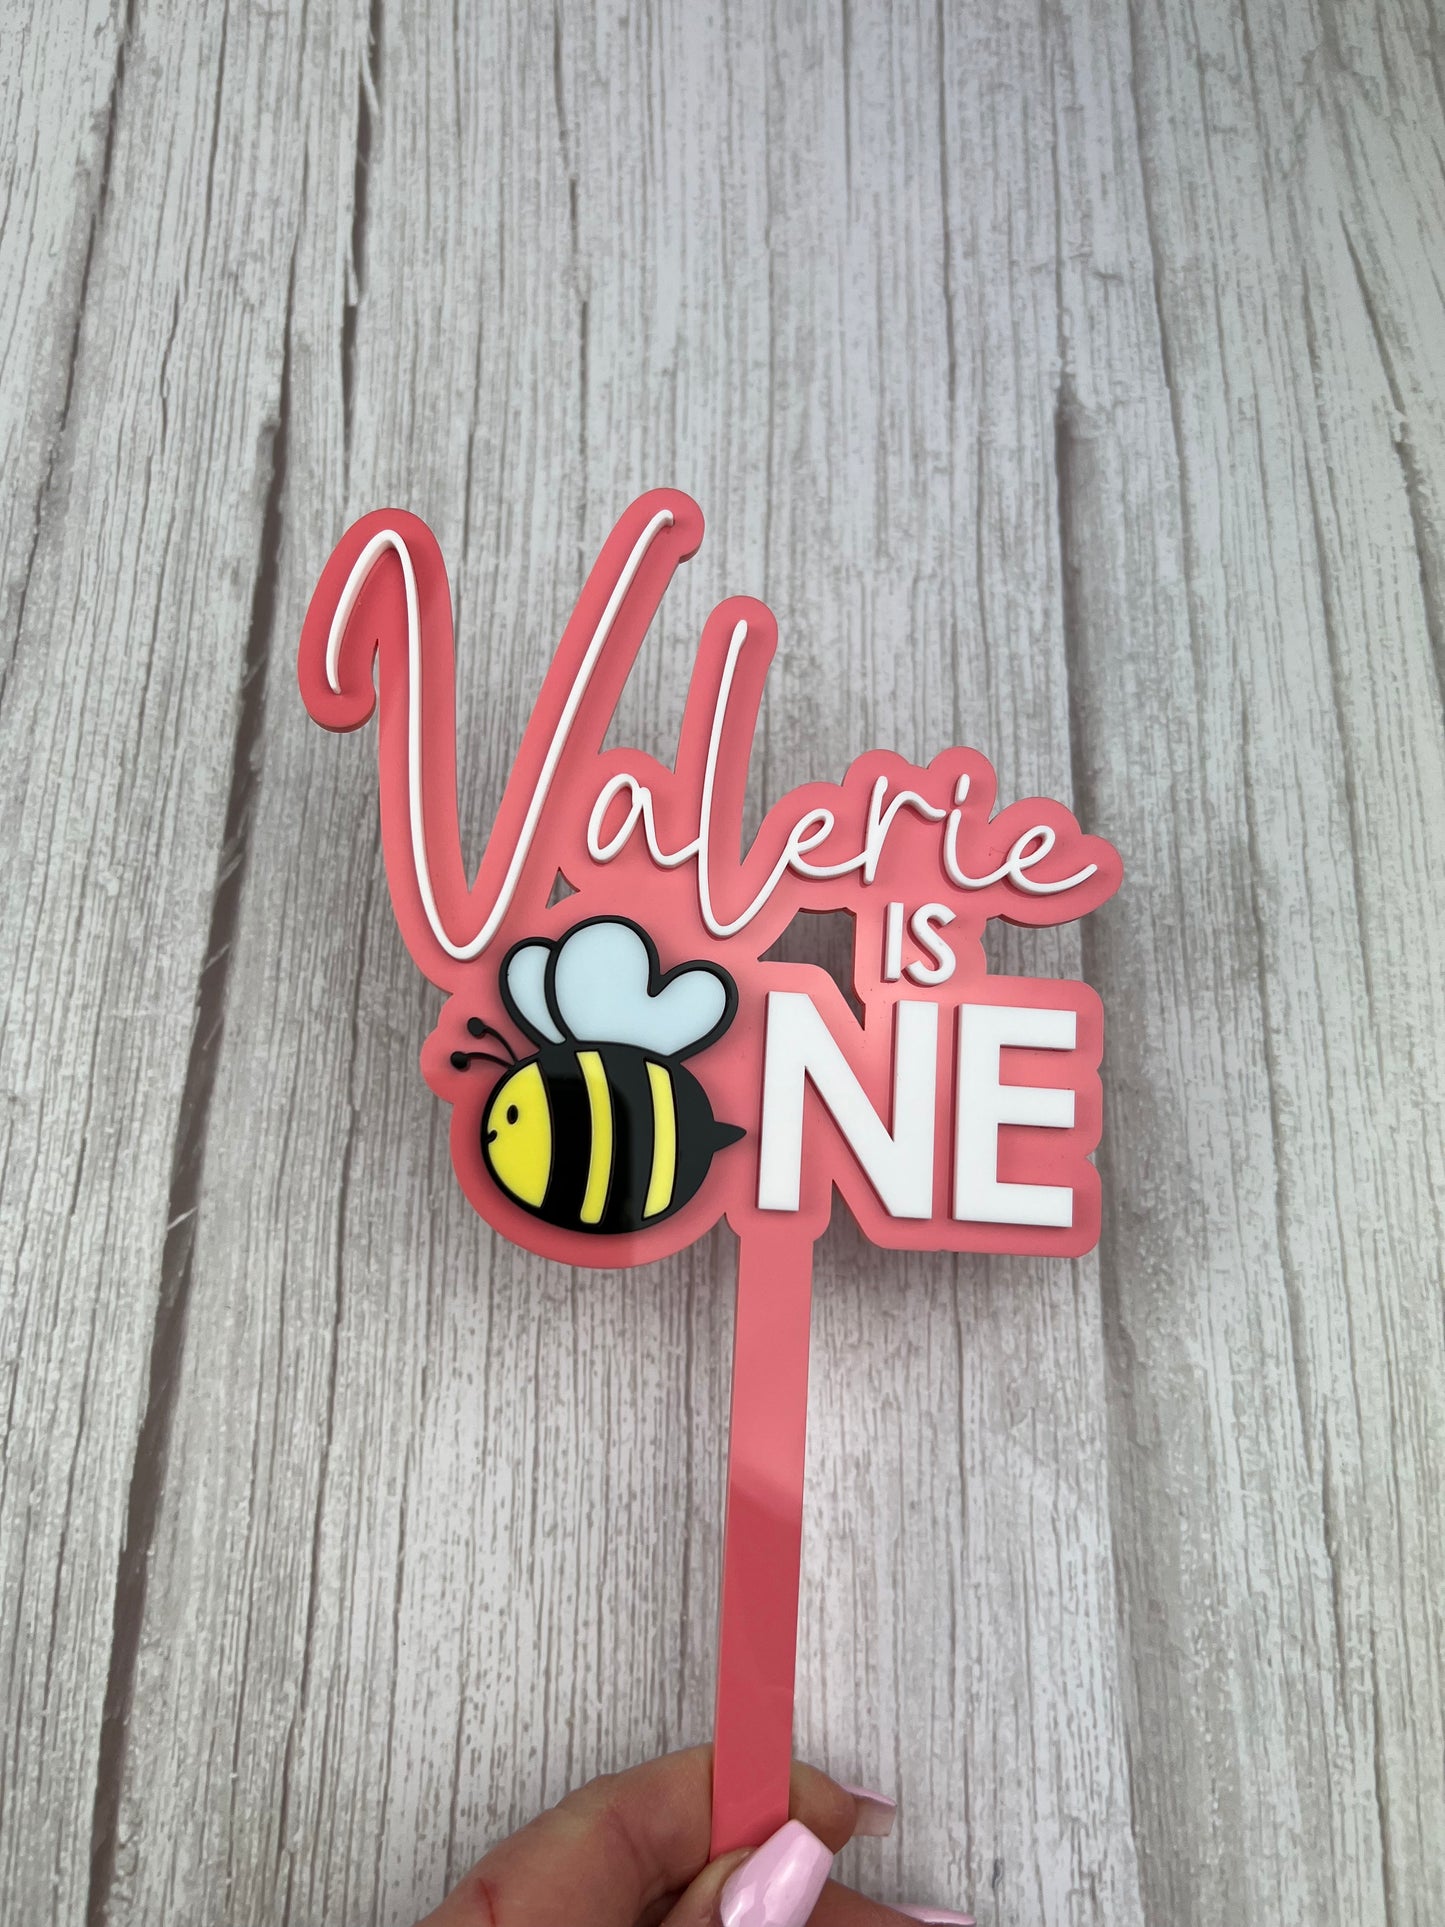 2 Layer 'Bee’ Acrylic Cake Topper